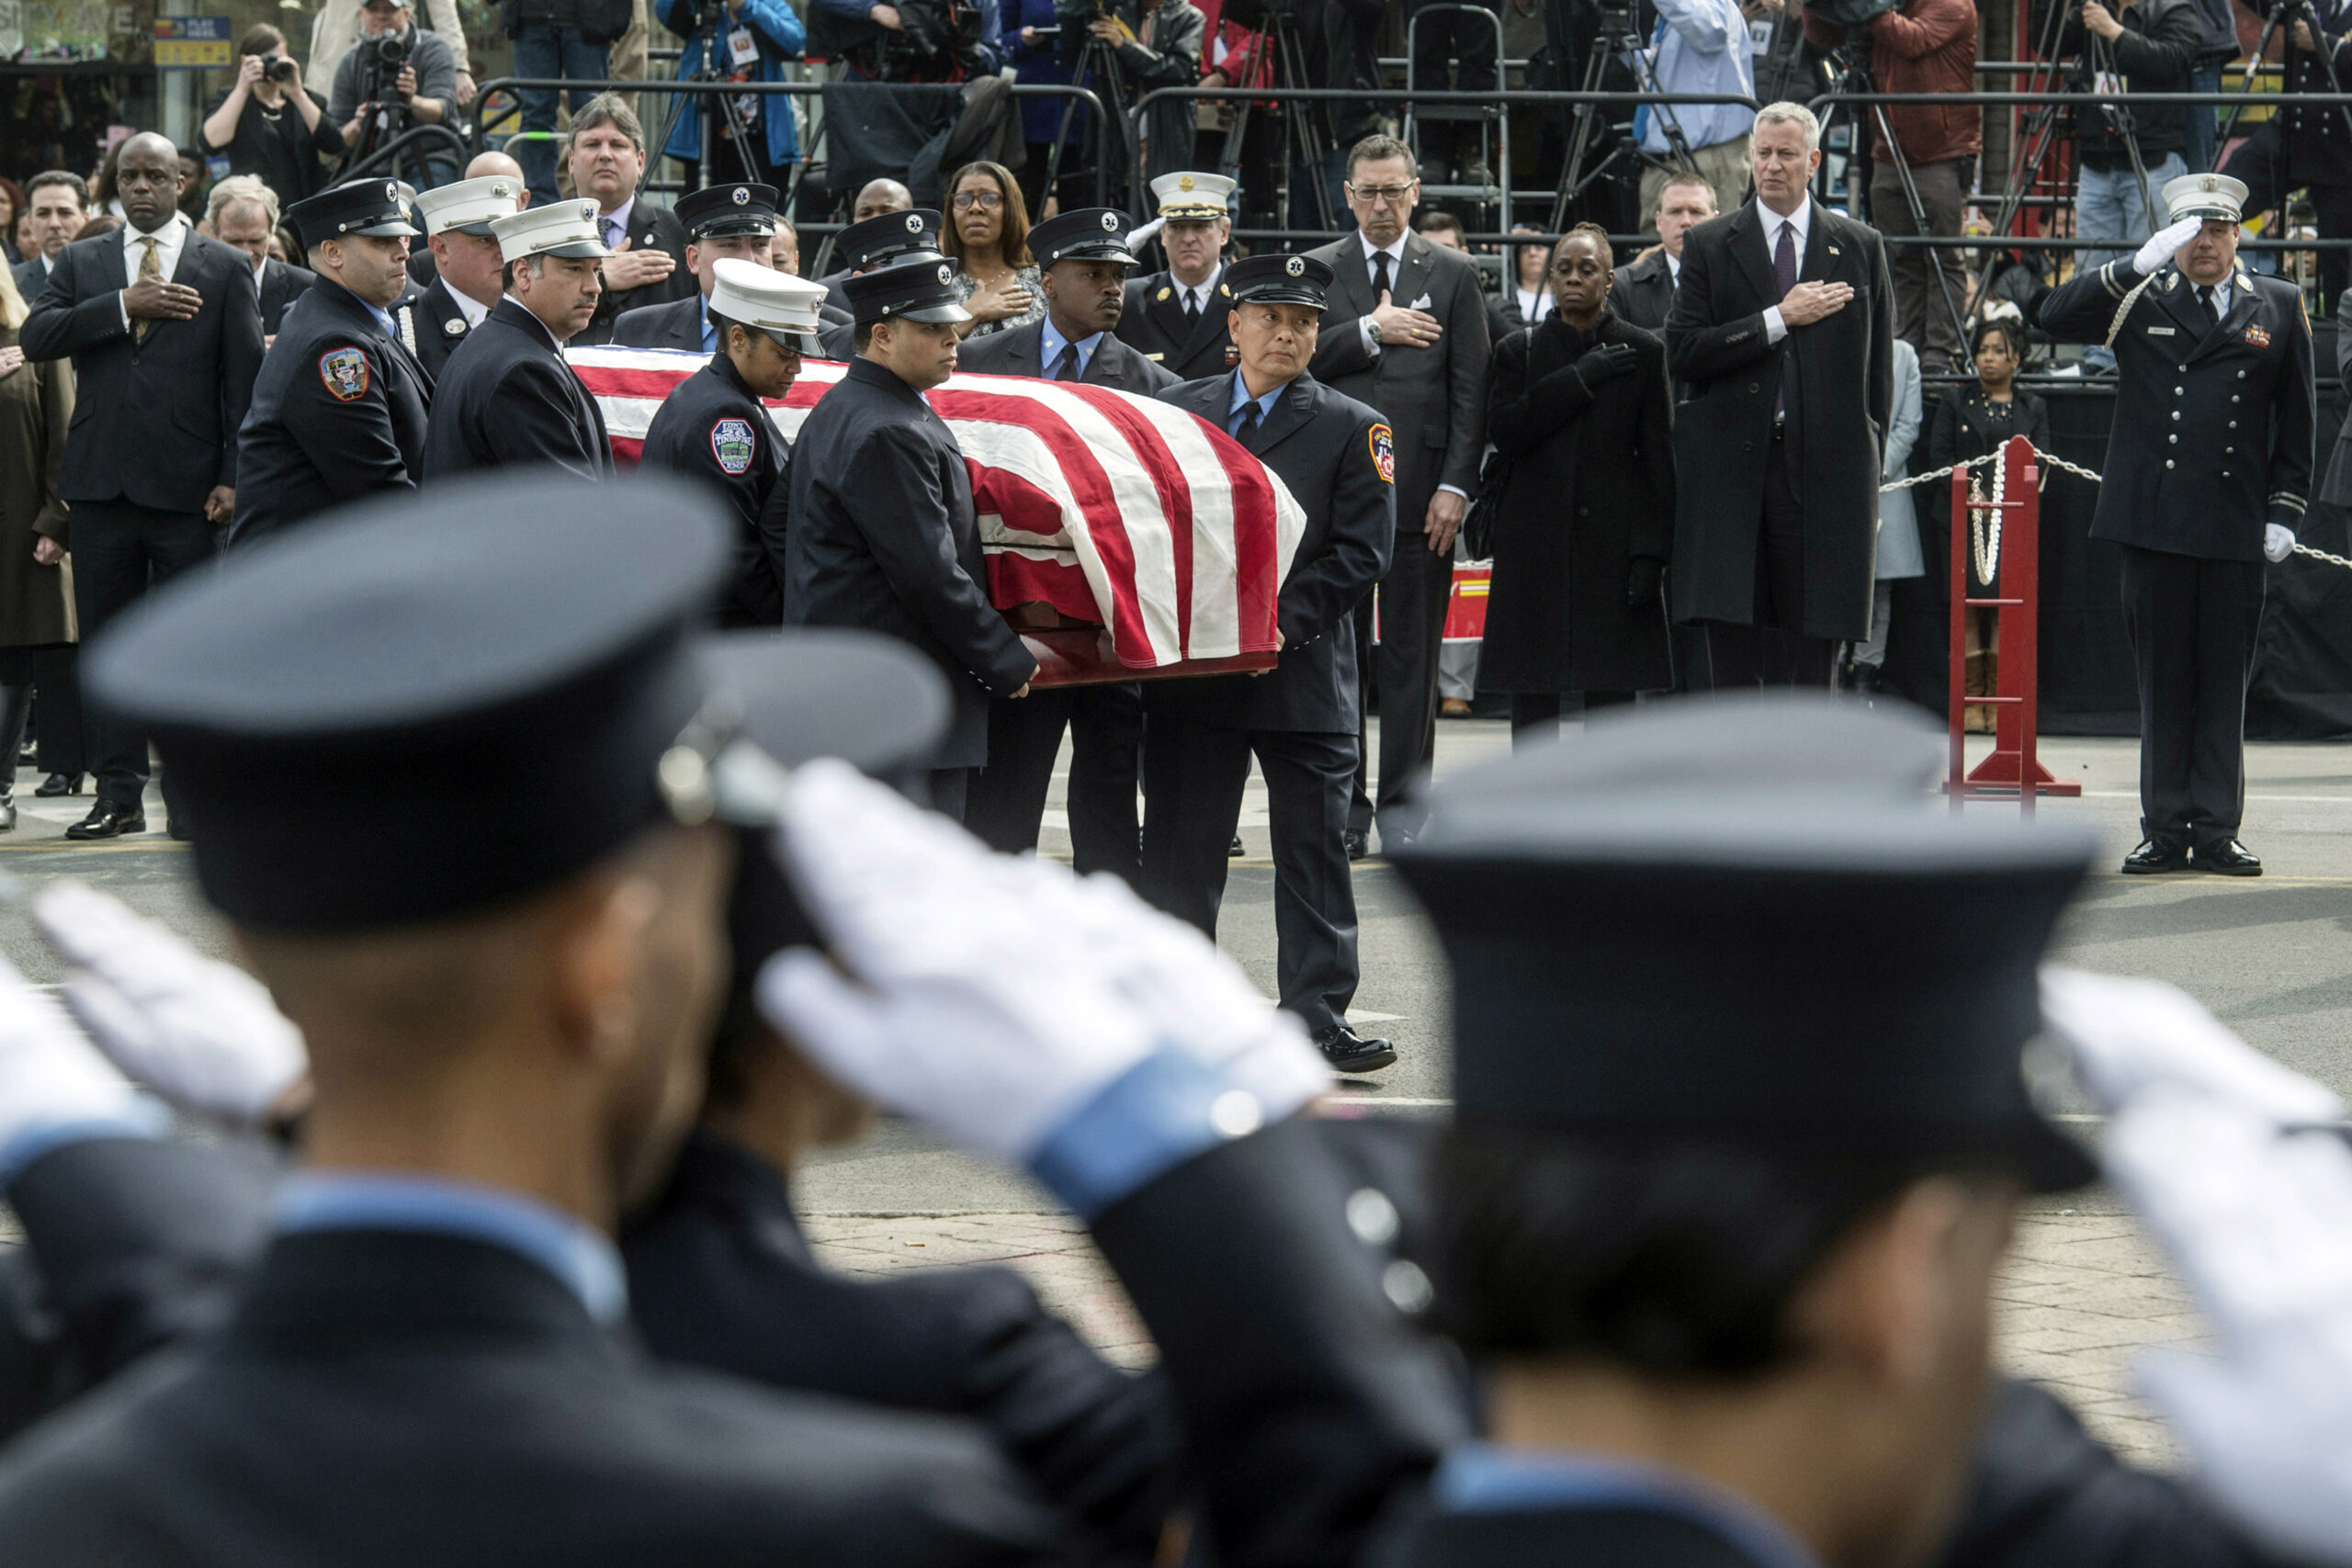 FILE - In this photo provided by the New York City Mayor's Office, pallbearers from the New York Ci...